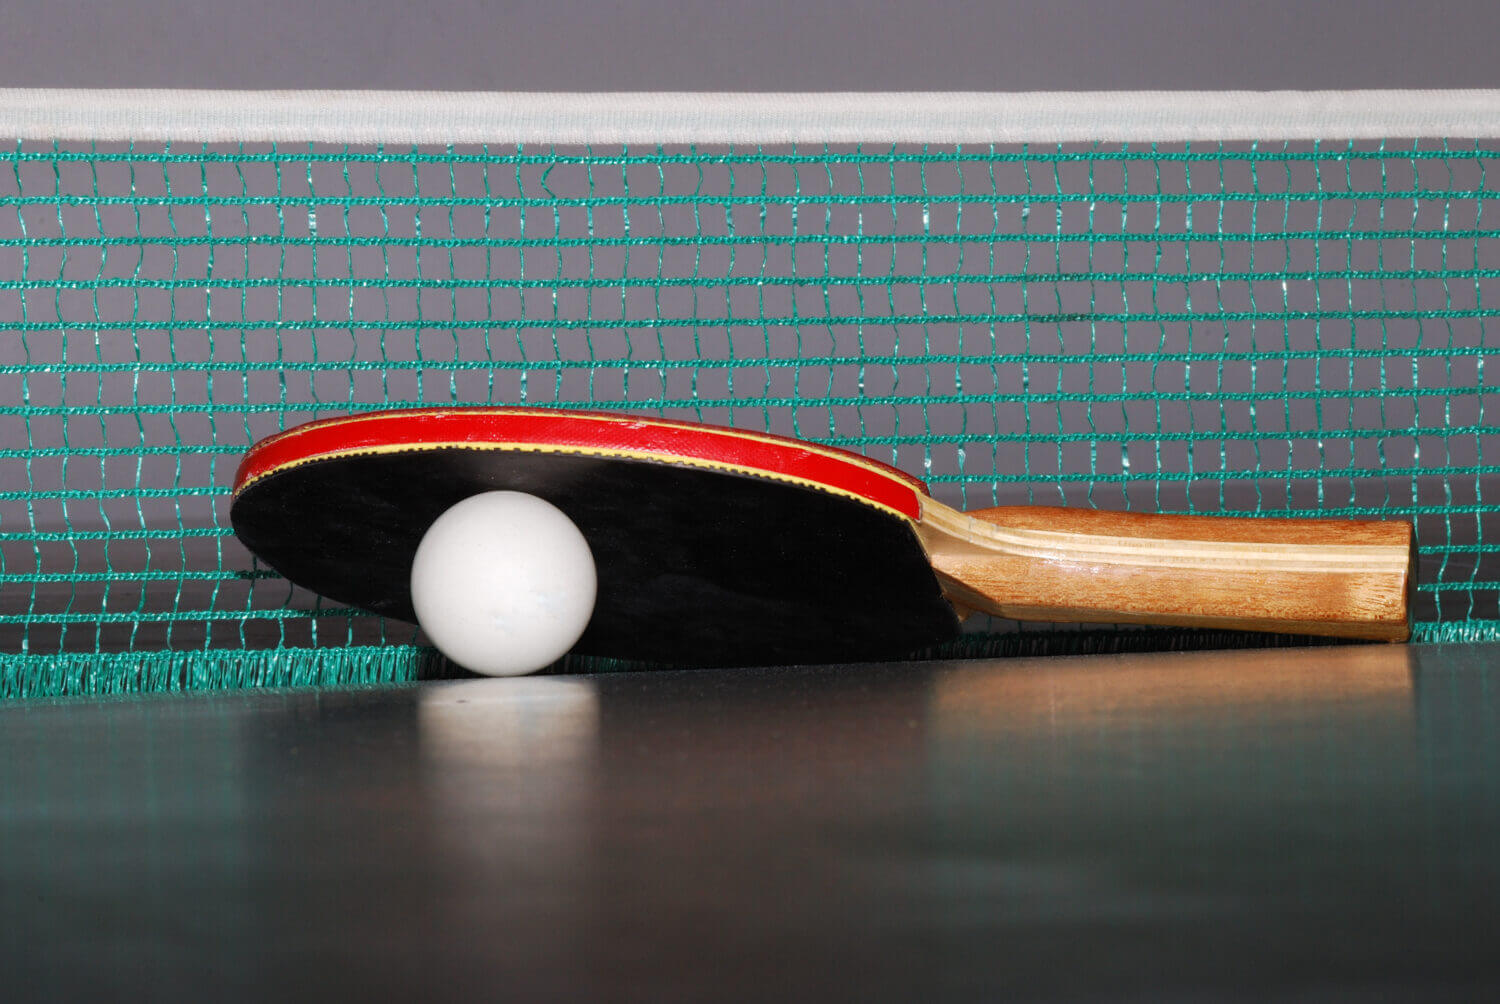 view table tennis racket with a large ball and net